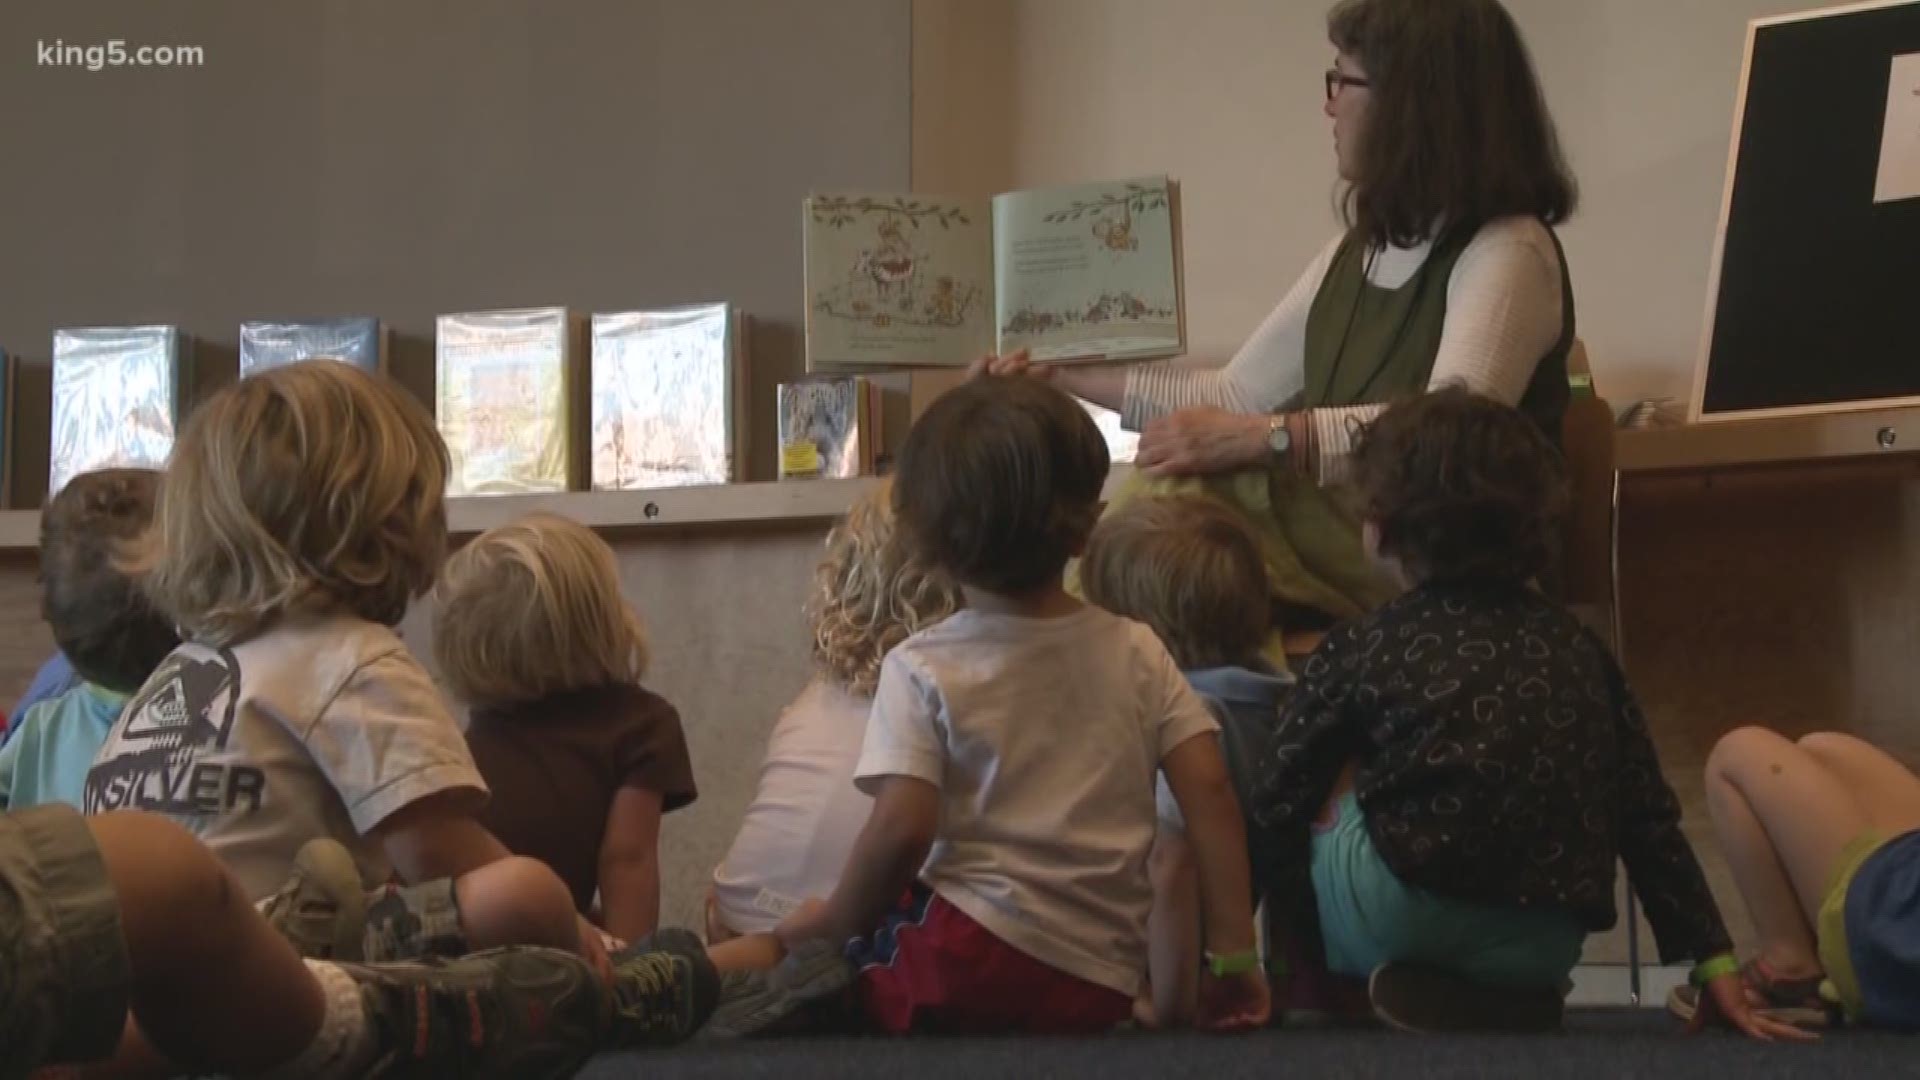 Washington lawmakers passed a new sex education bill that would start as early as kindergarten.